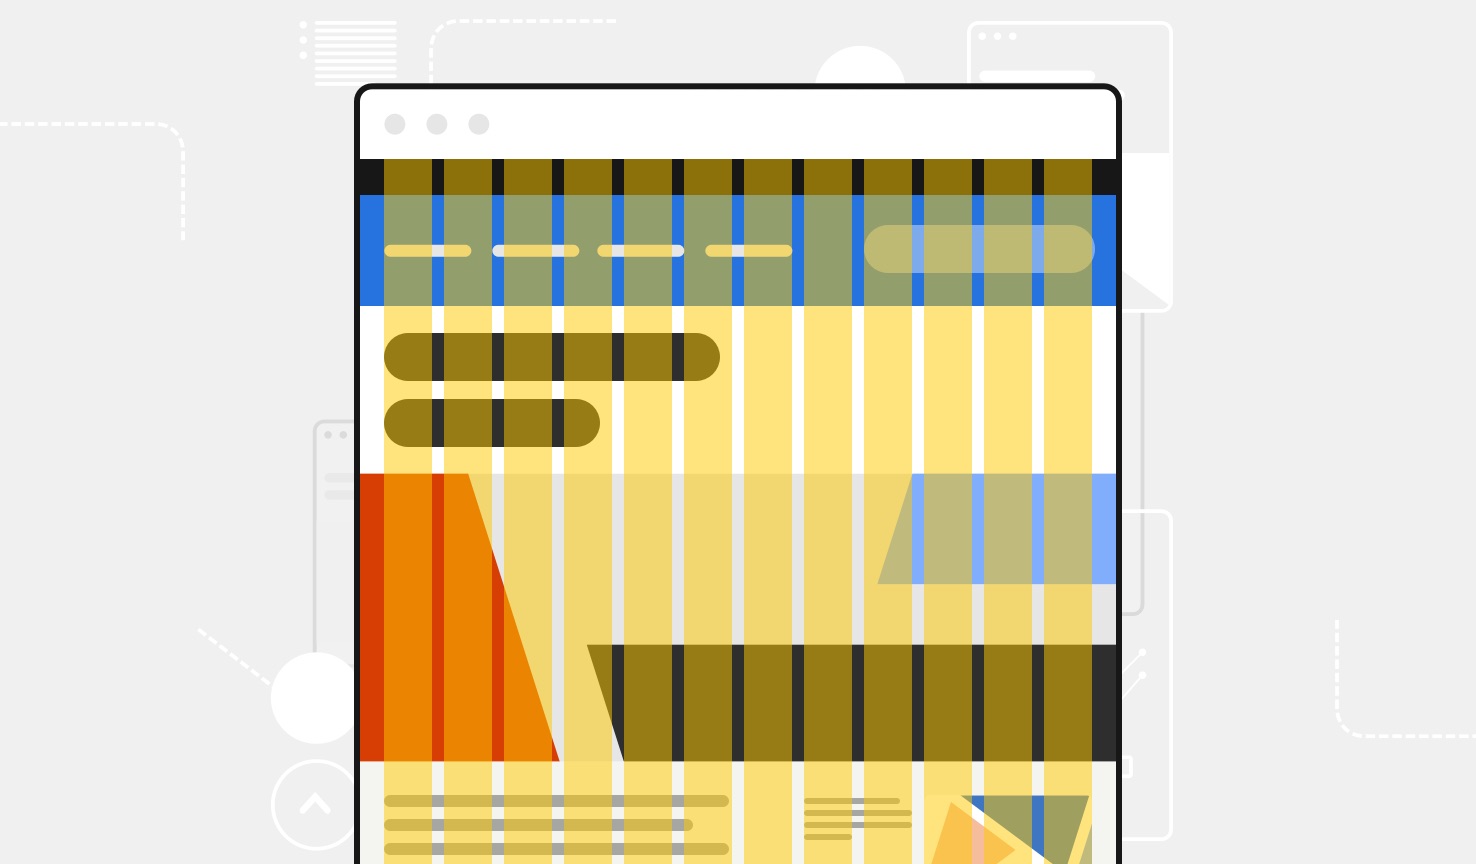 An illustration shows a yellow 12-column grid system overlaid on a colorful website.